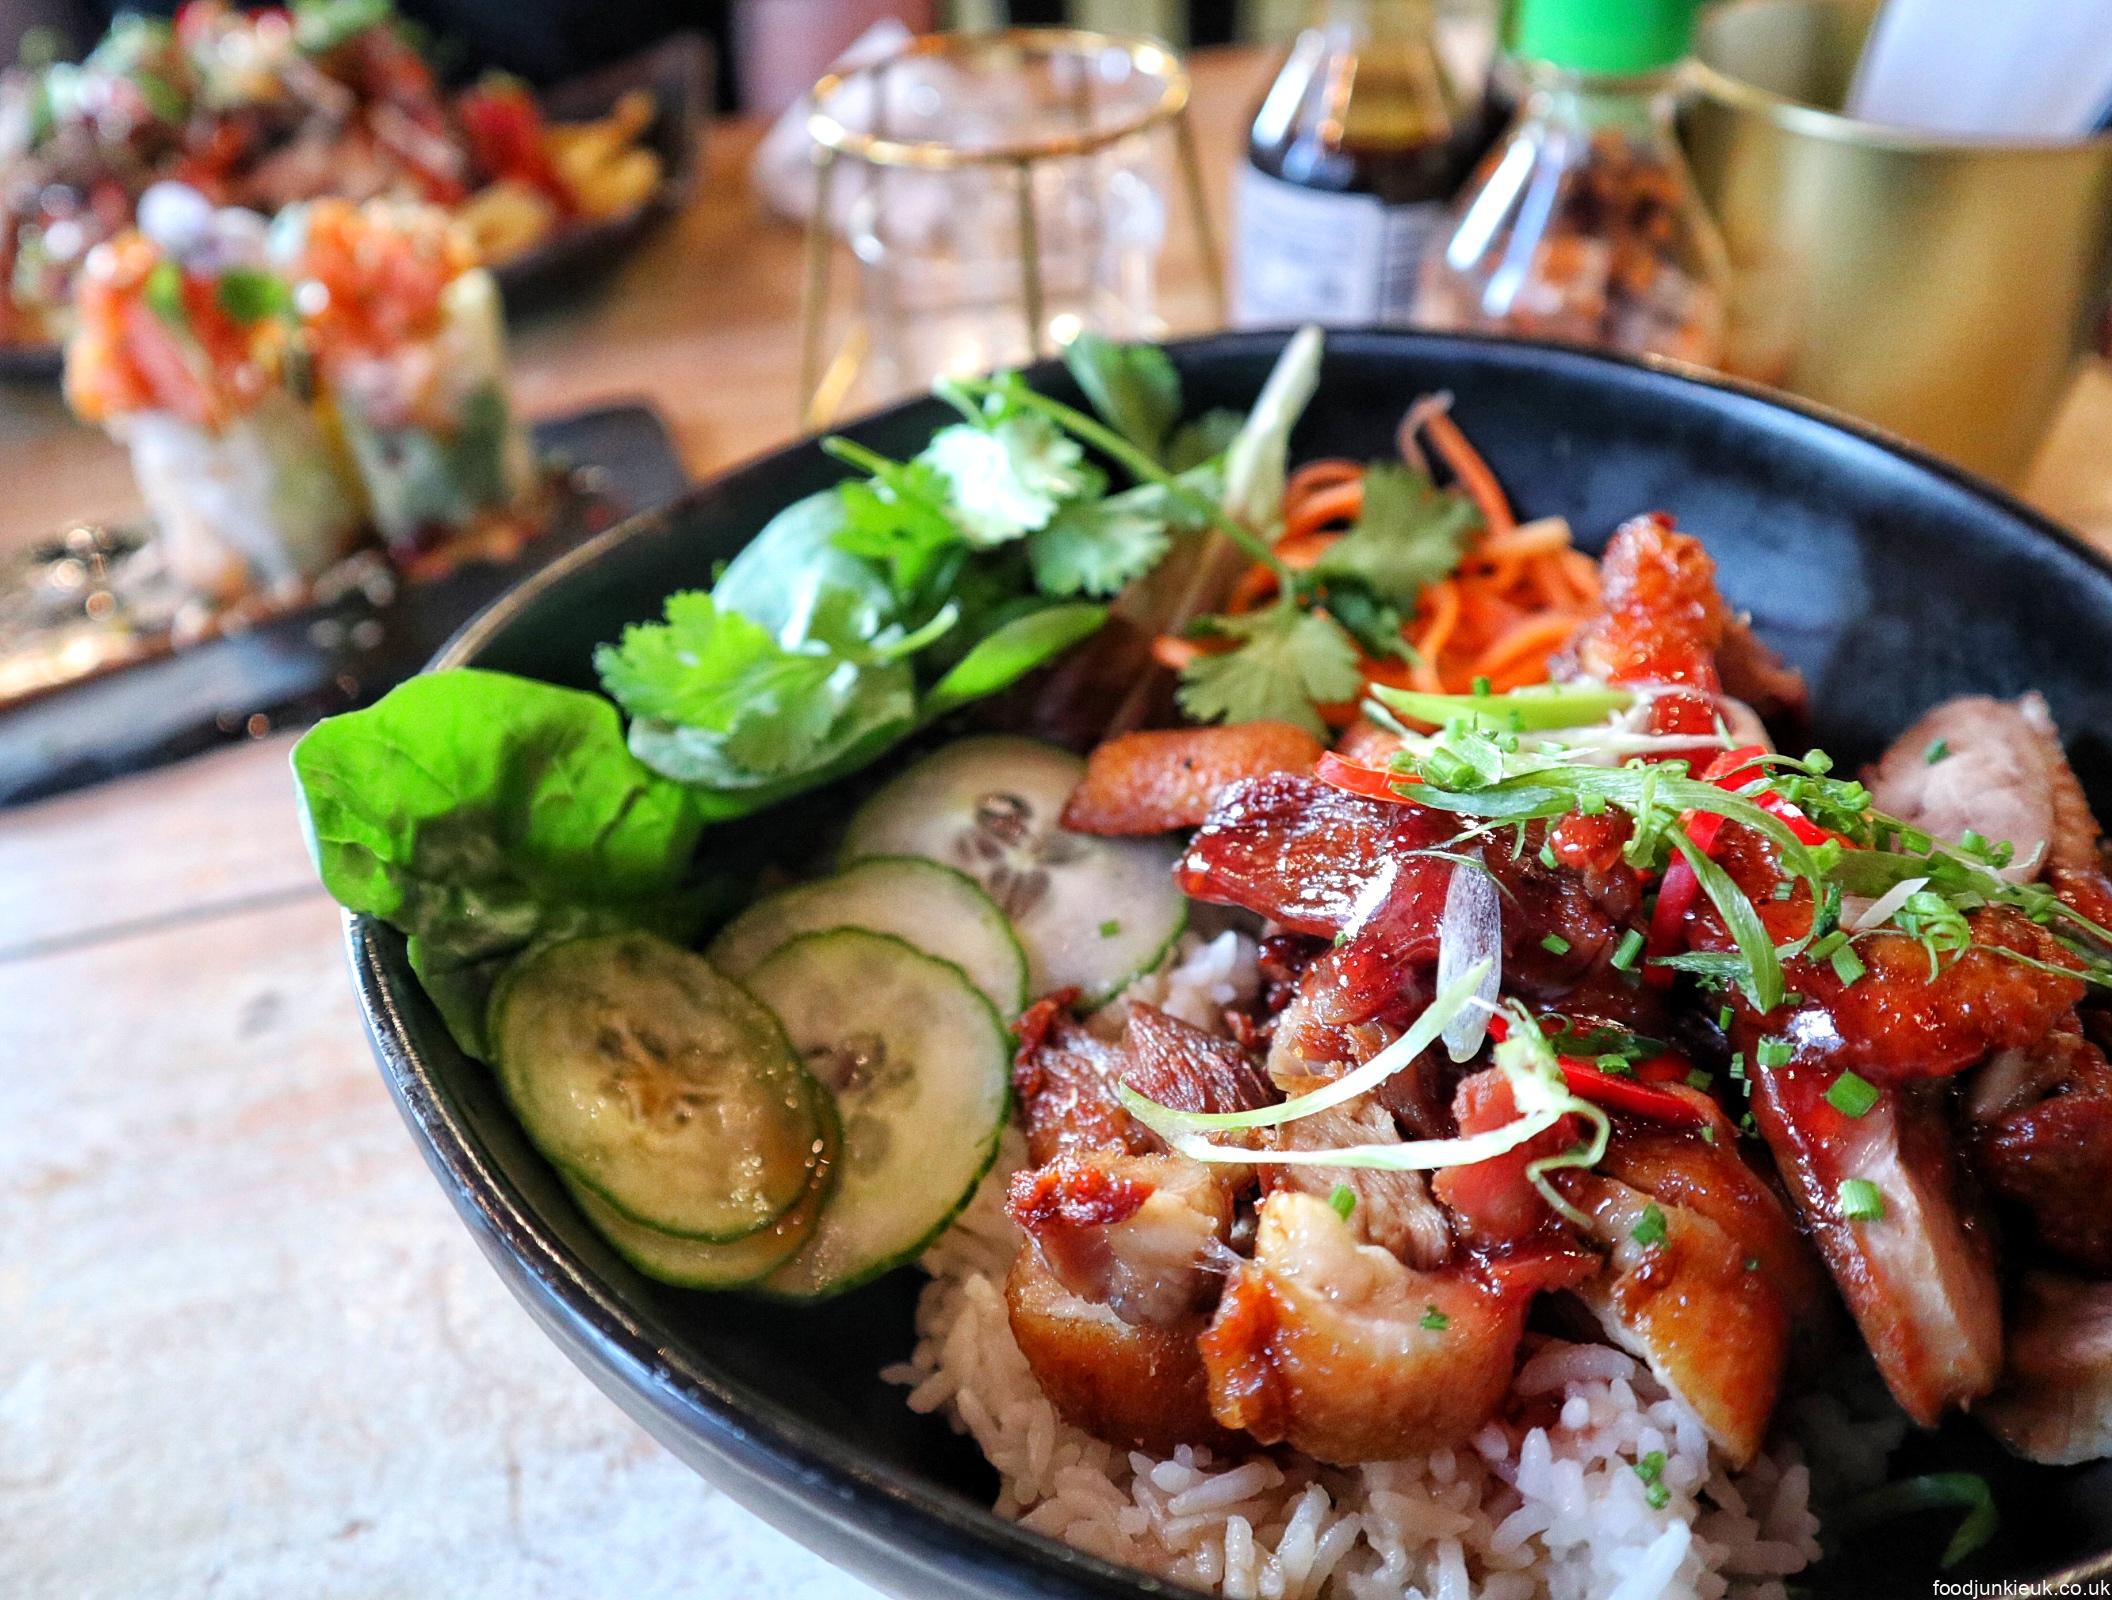 Vietnamese Fusion in Ancoats - Viet Shack